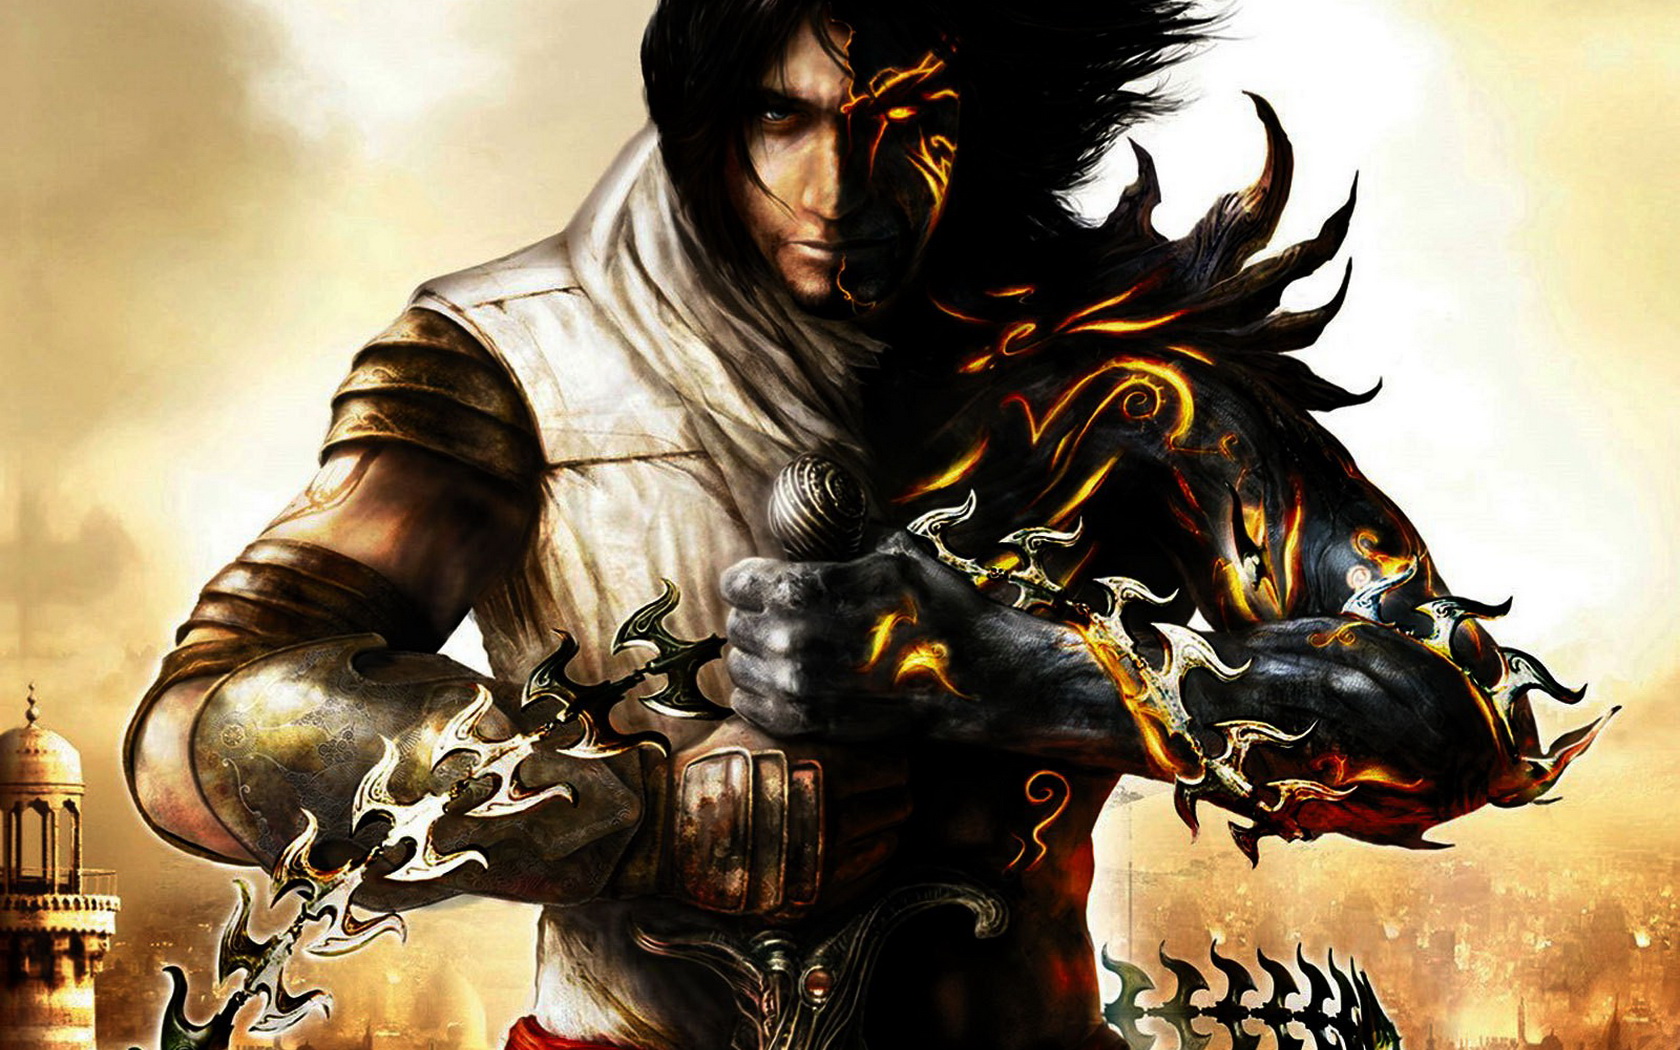 Prince of persia two thrones steam фото 1